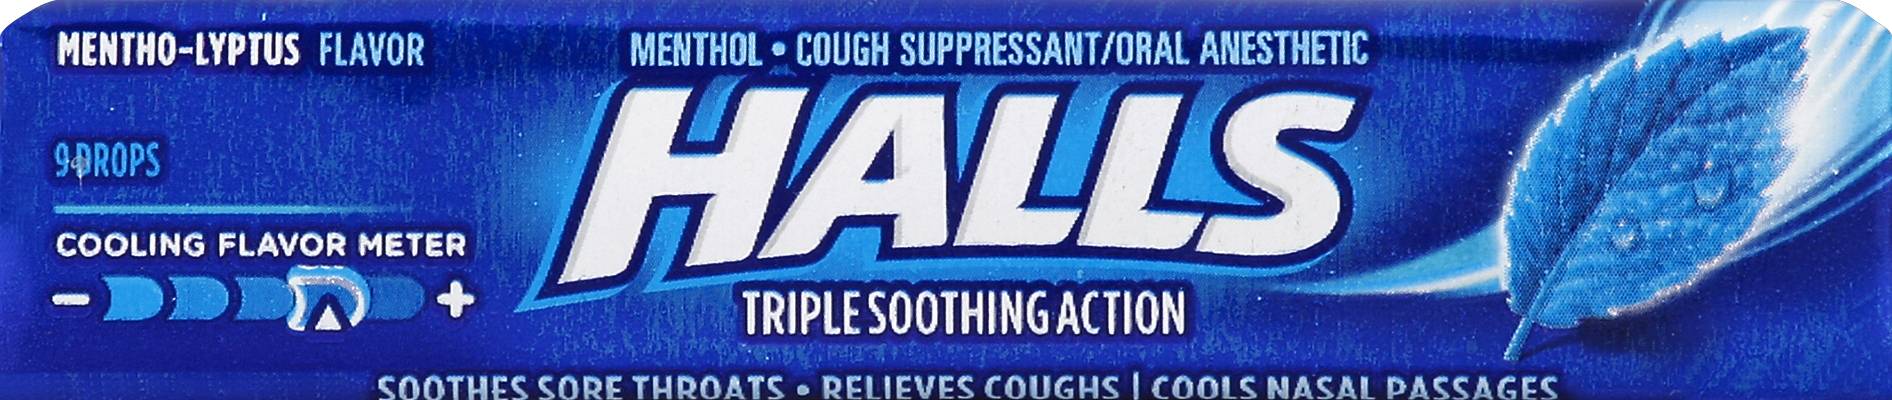 Halls Triple Soothing Action Cough Suppressant (9 ct) (mentho-lyptus)